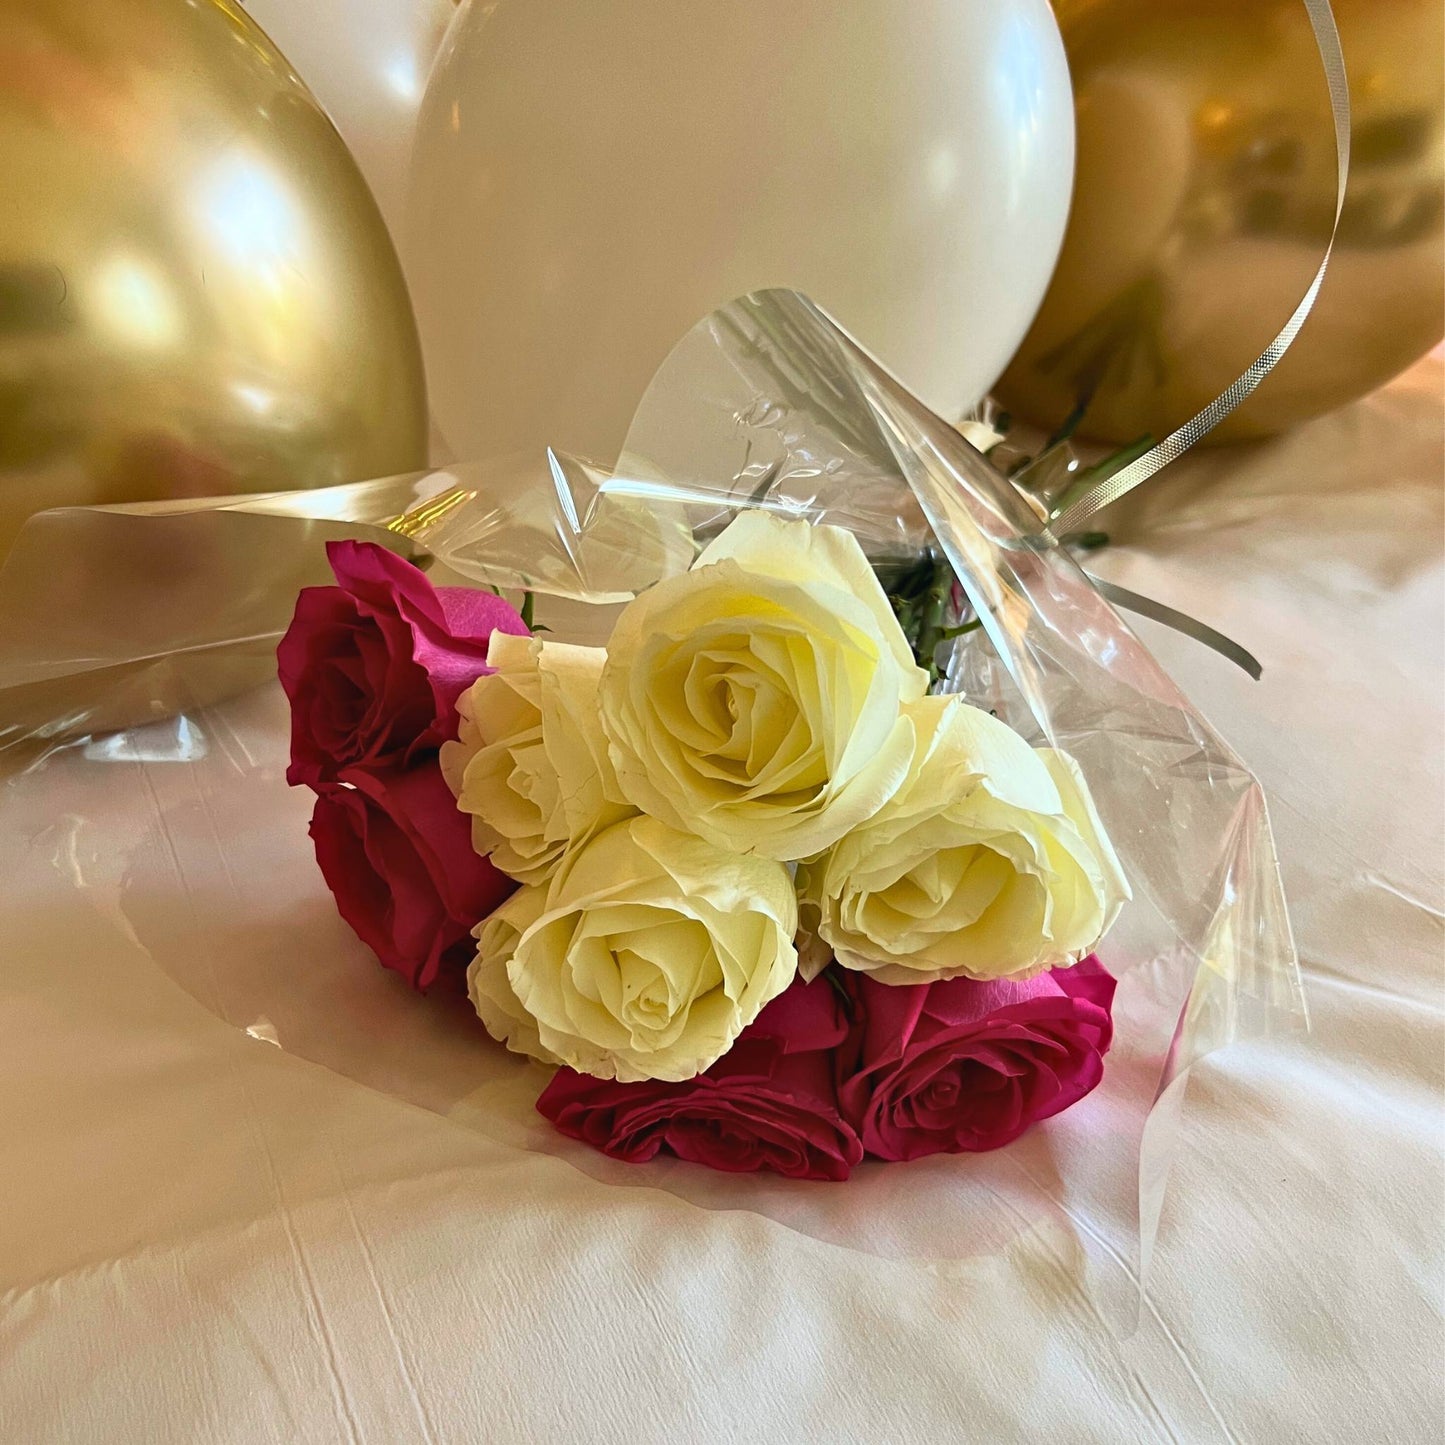 Pink and White Roses on a Bed with balloons